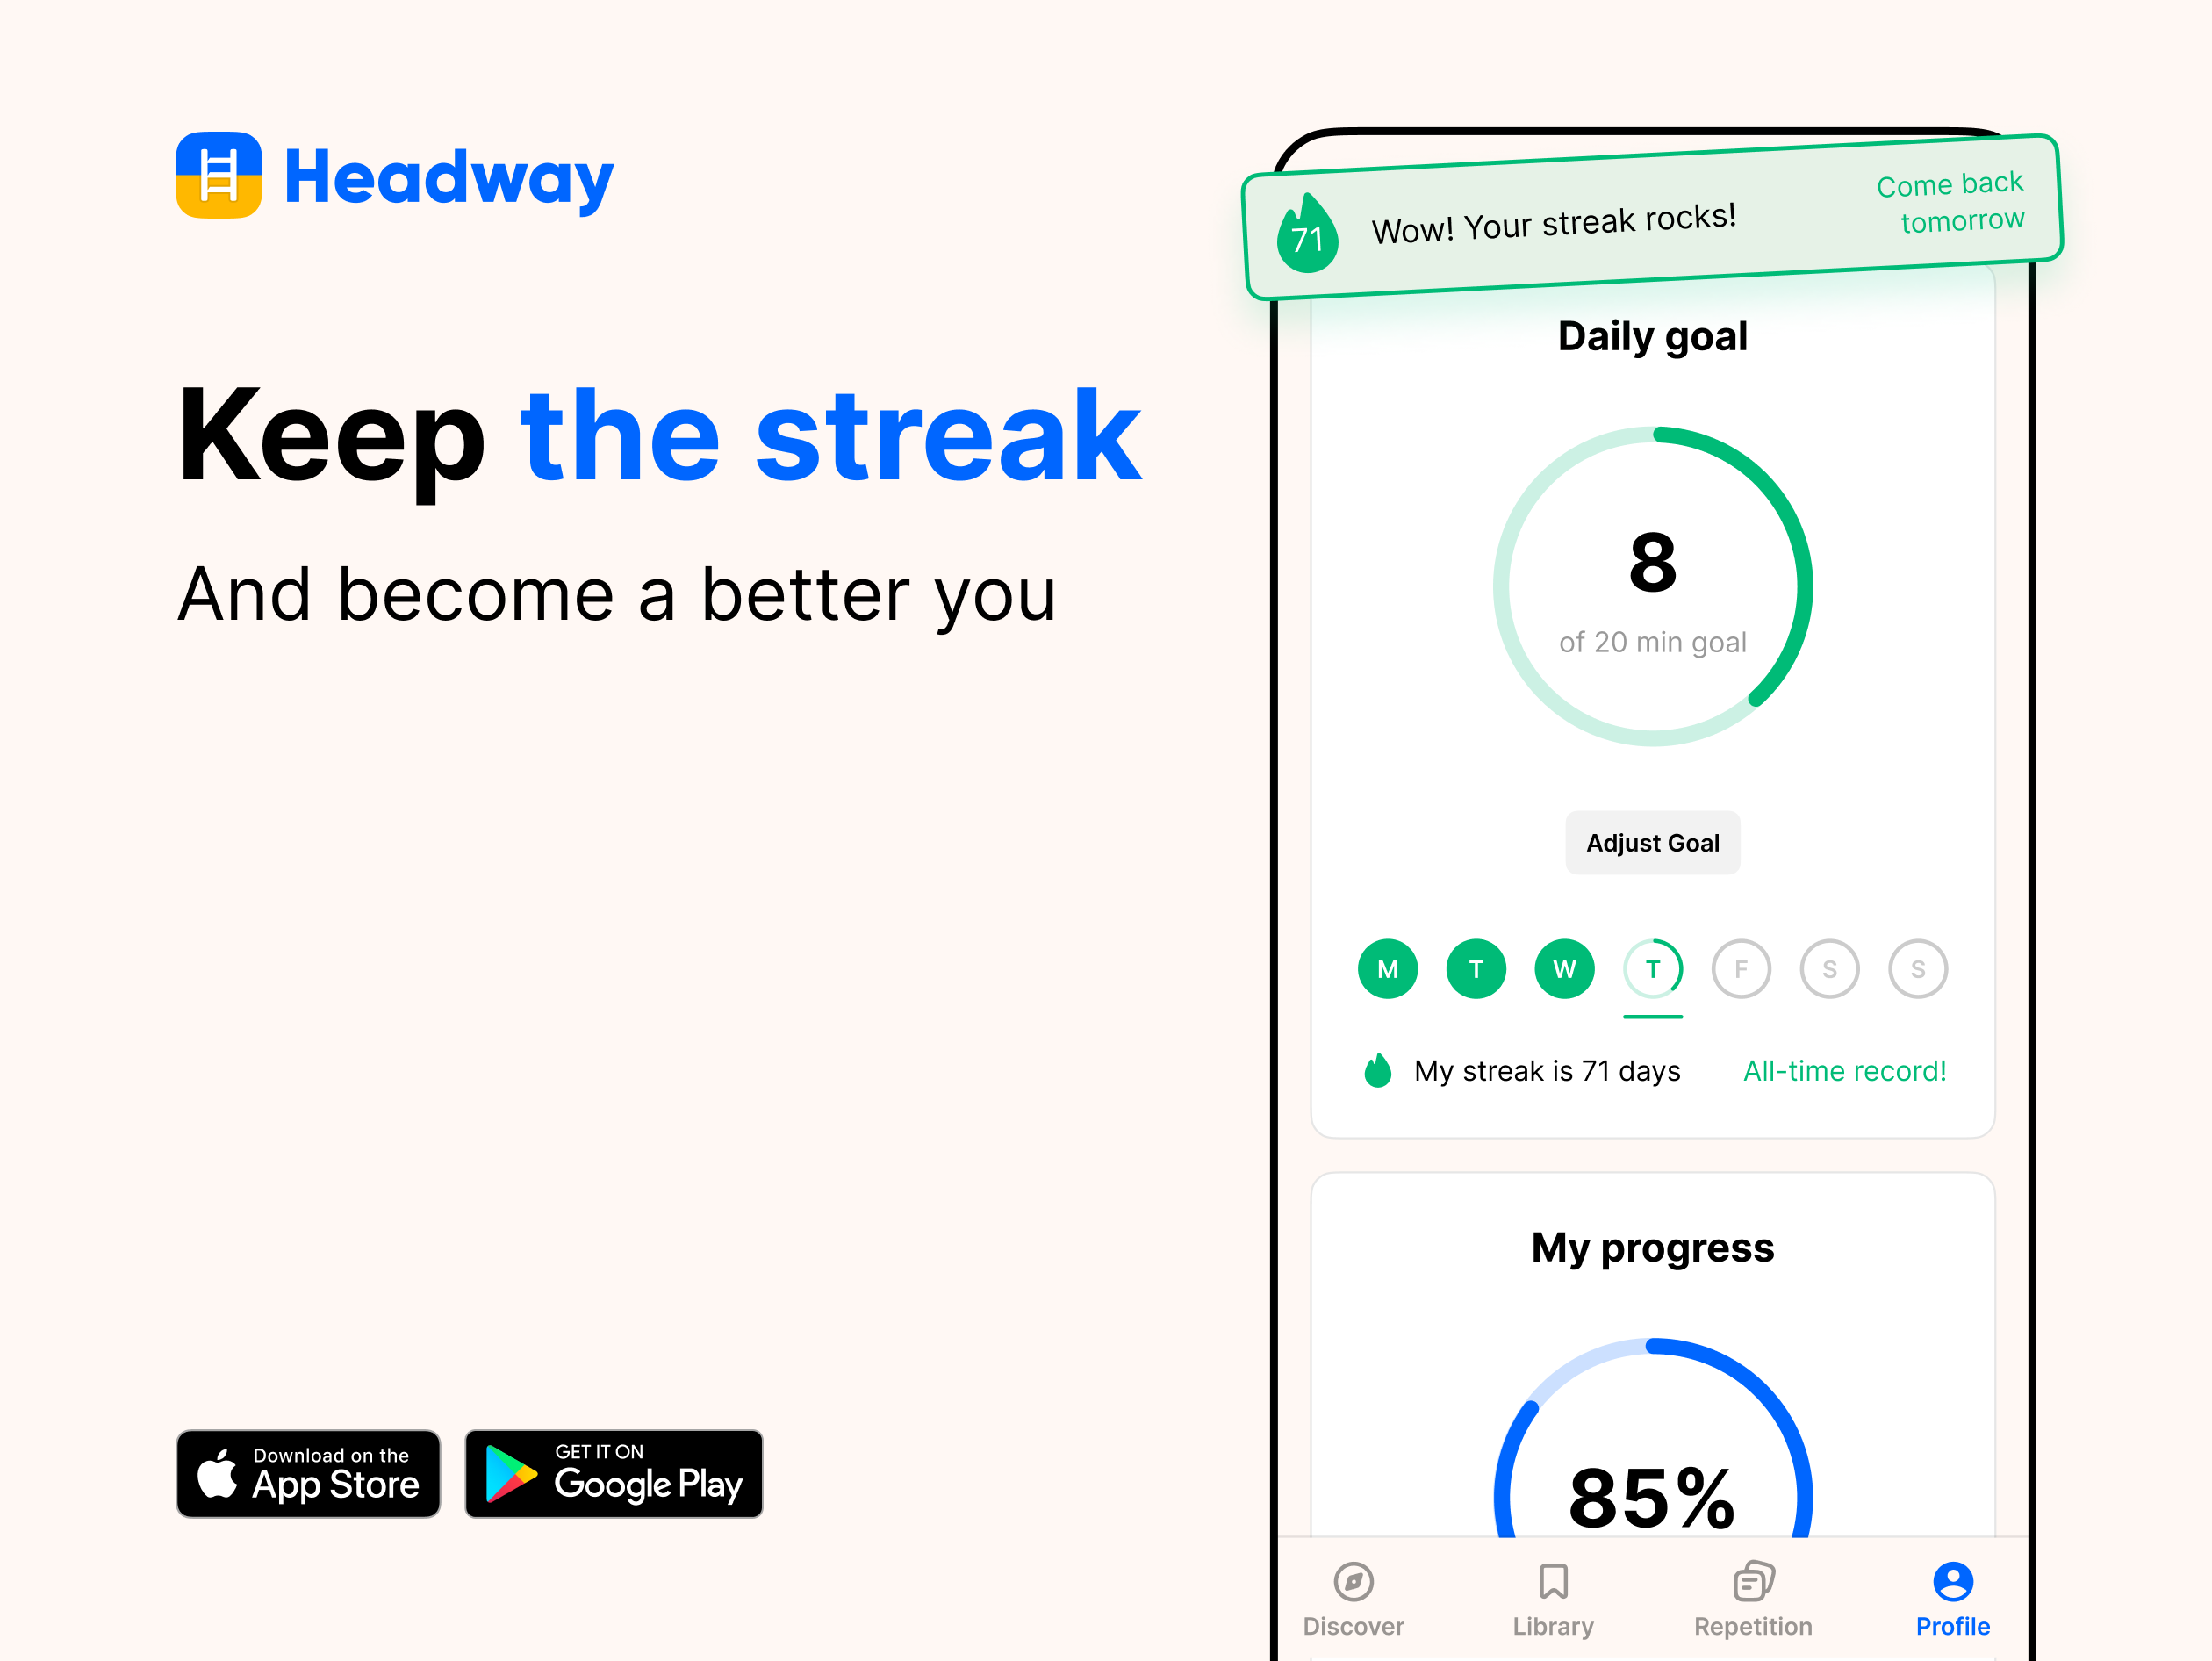 Keep the streak and become a better you